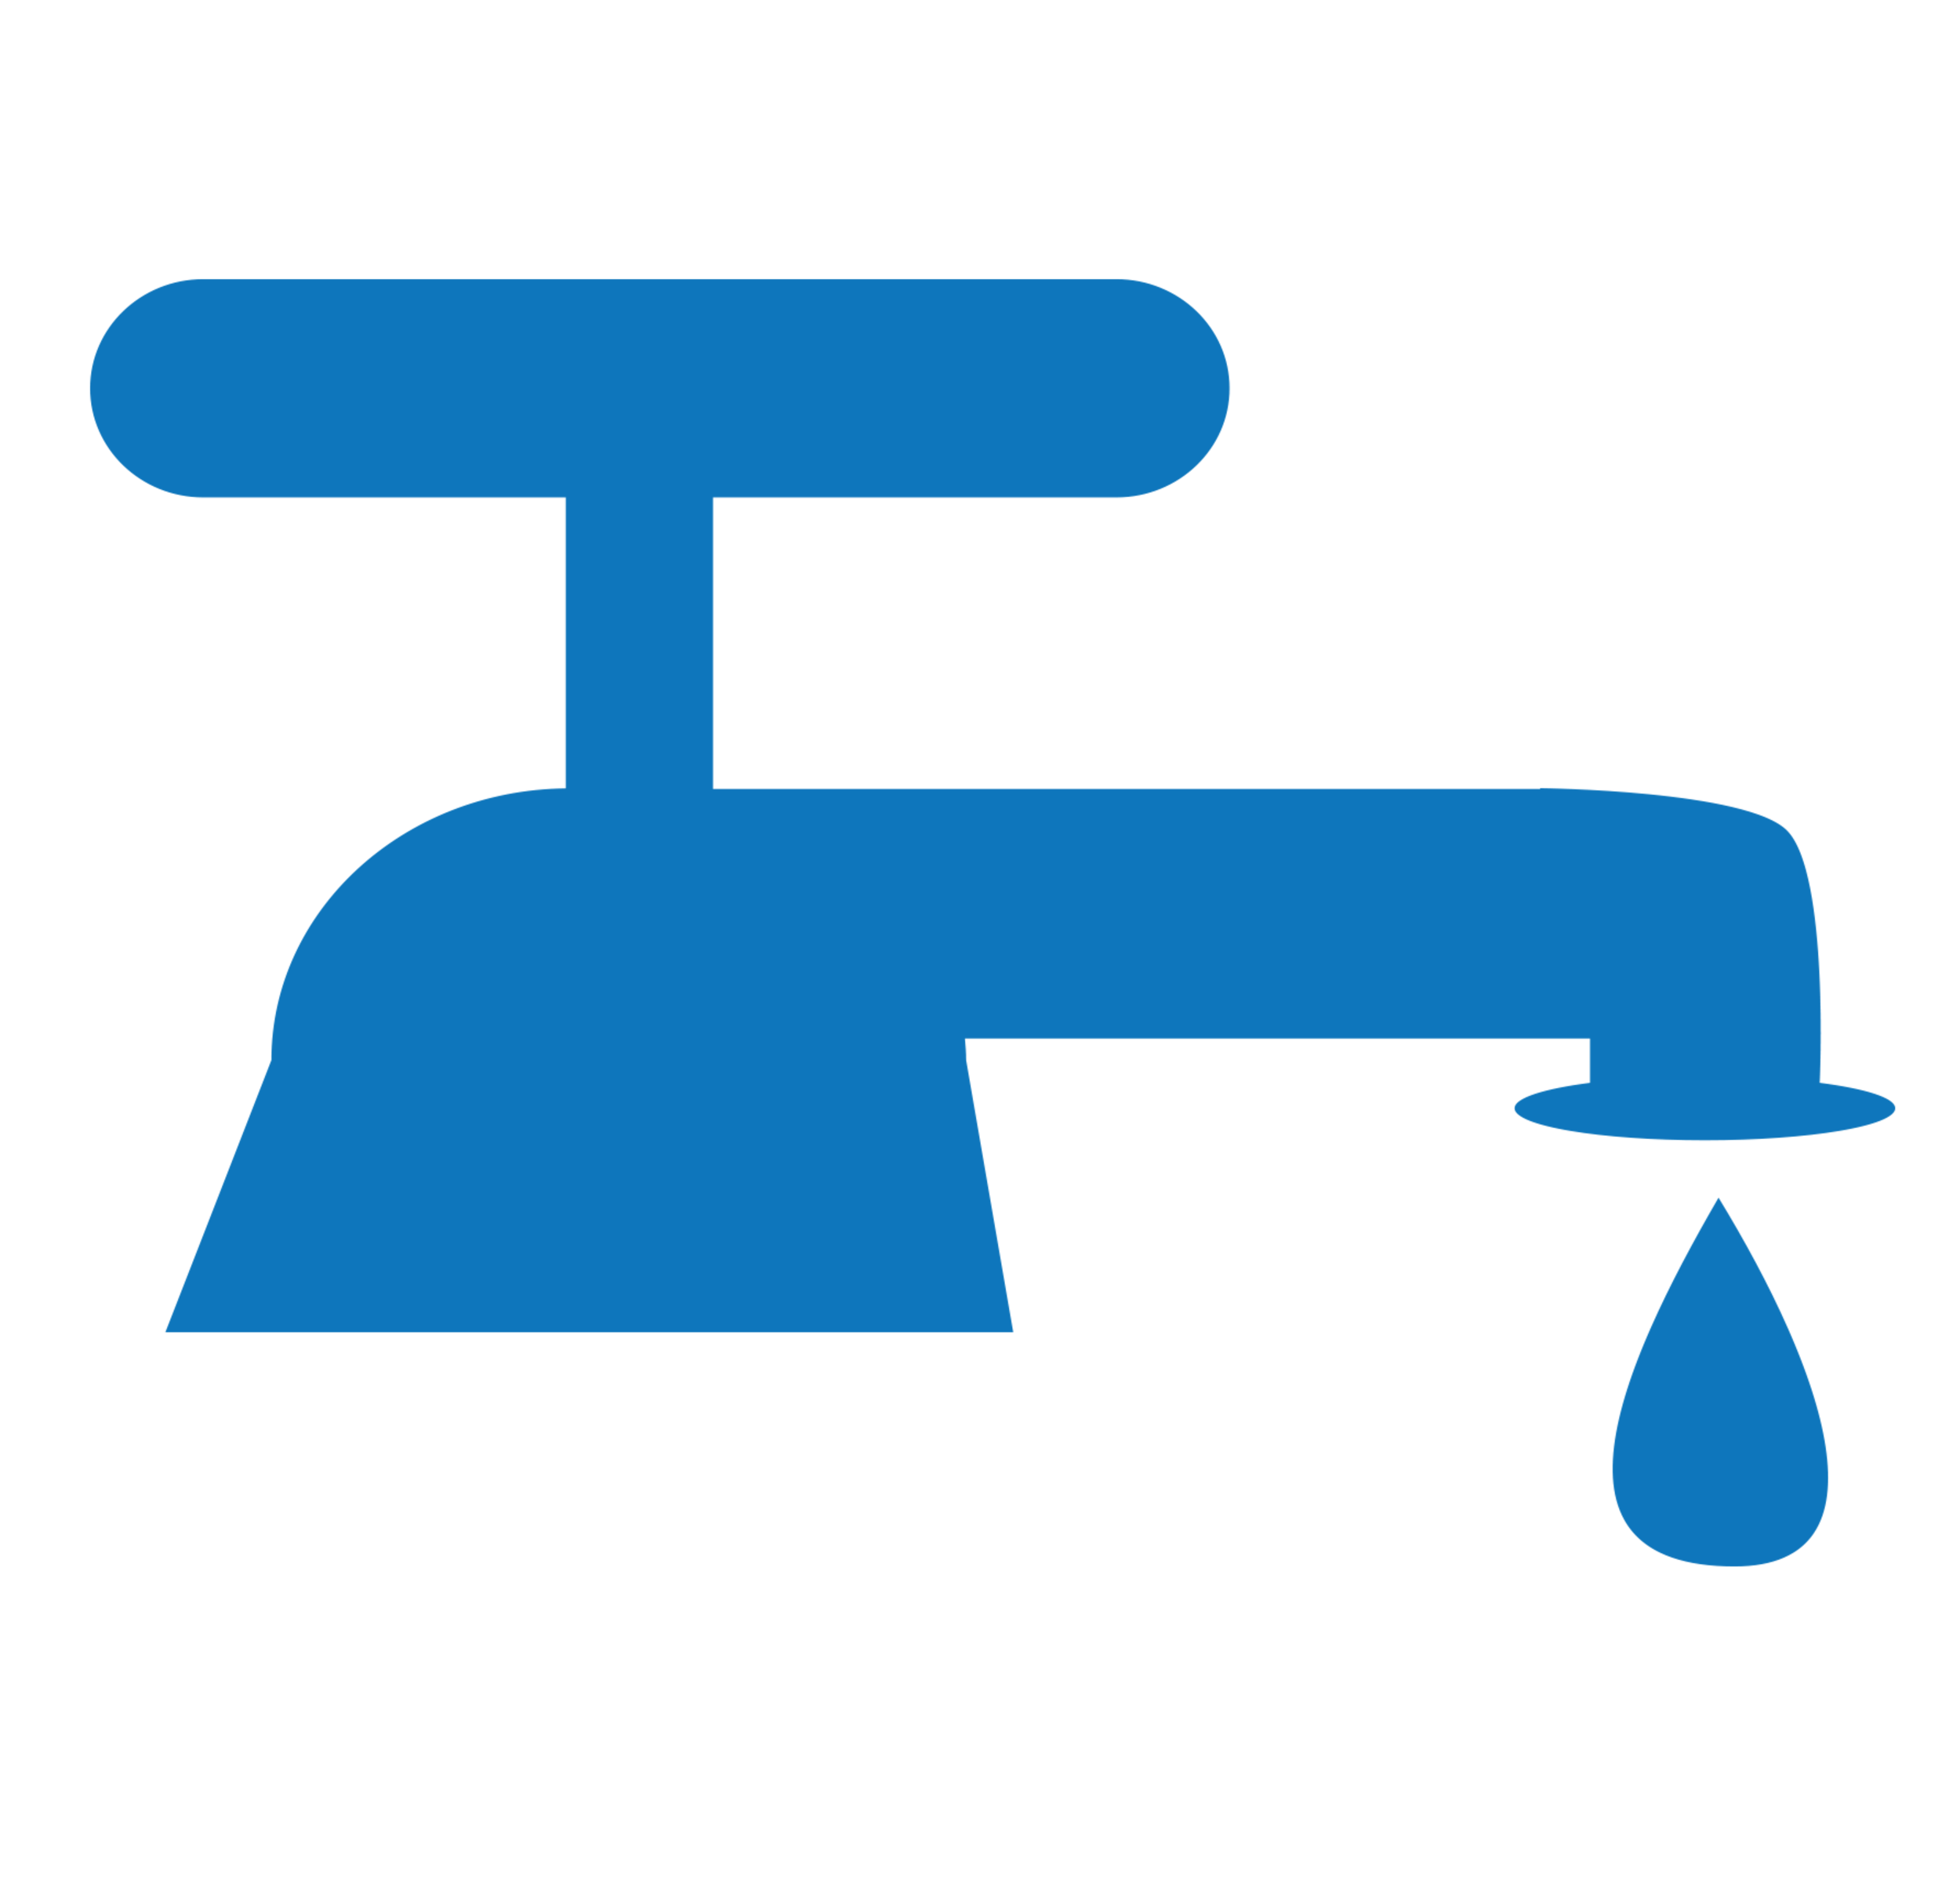 Faucet clipart cold water. Fine image sink ideas